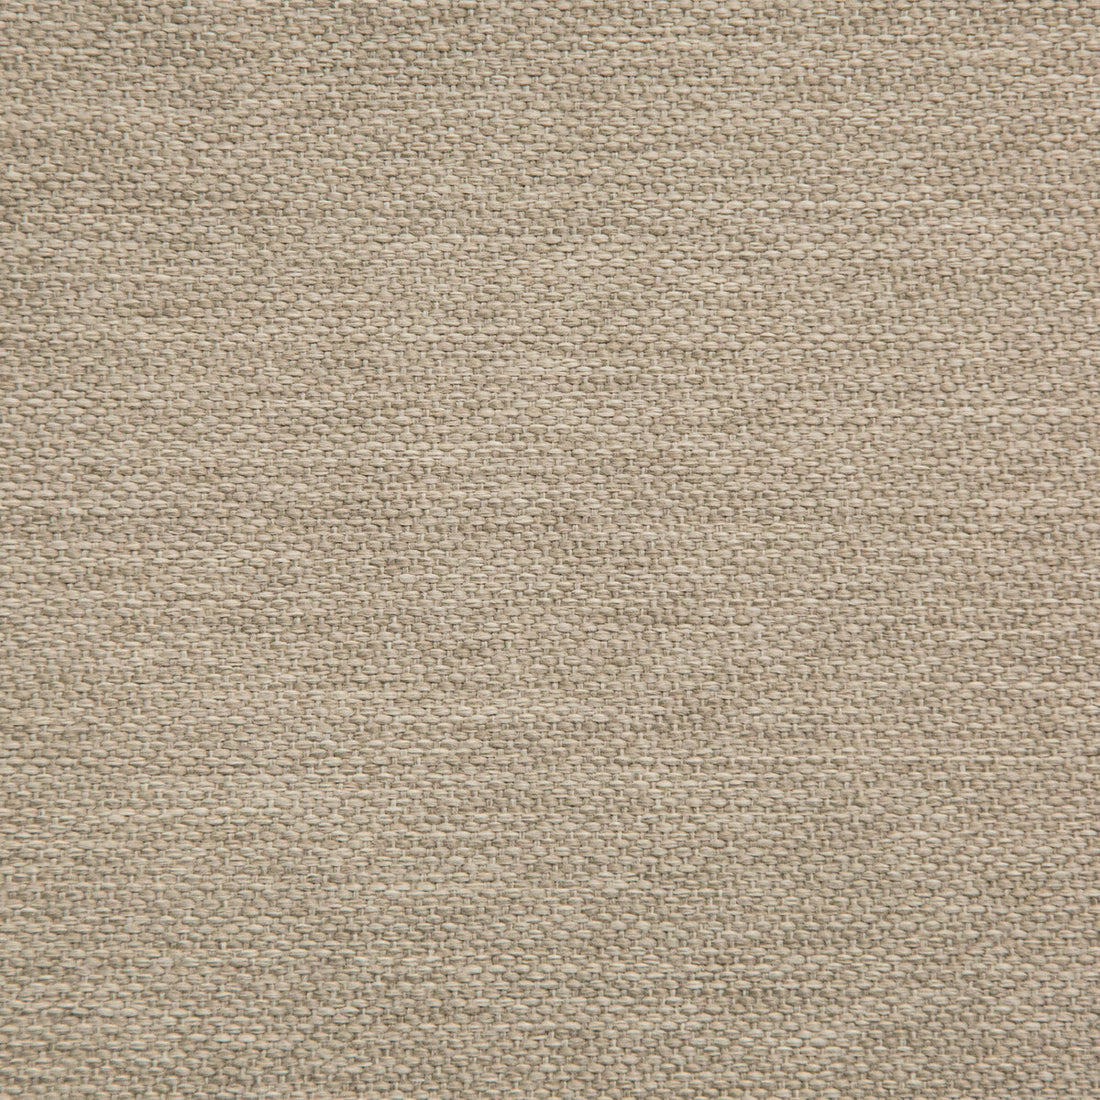 Ghyll fabric in dune color - pattern 35836.16.0 - by Kravet Design in the Indoor / Outdoor collection